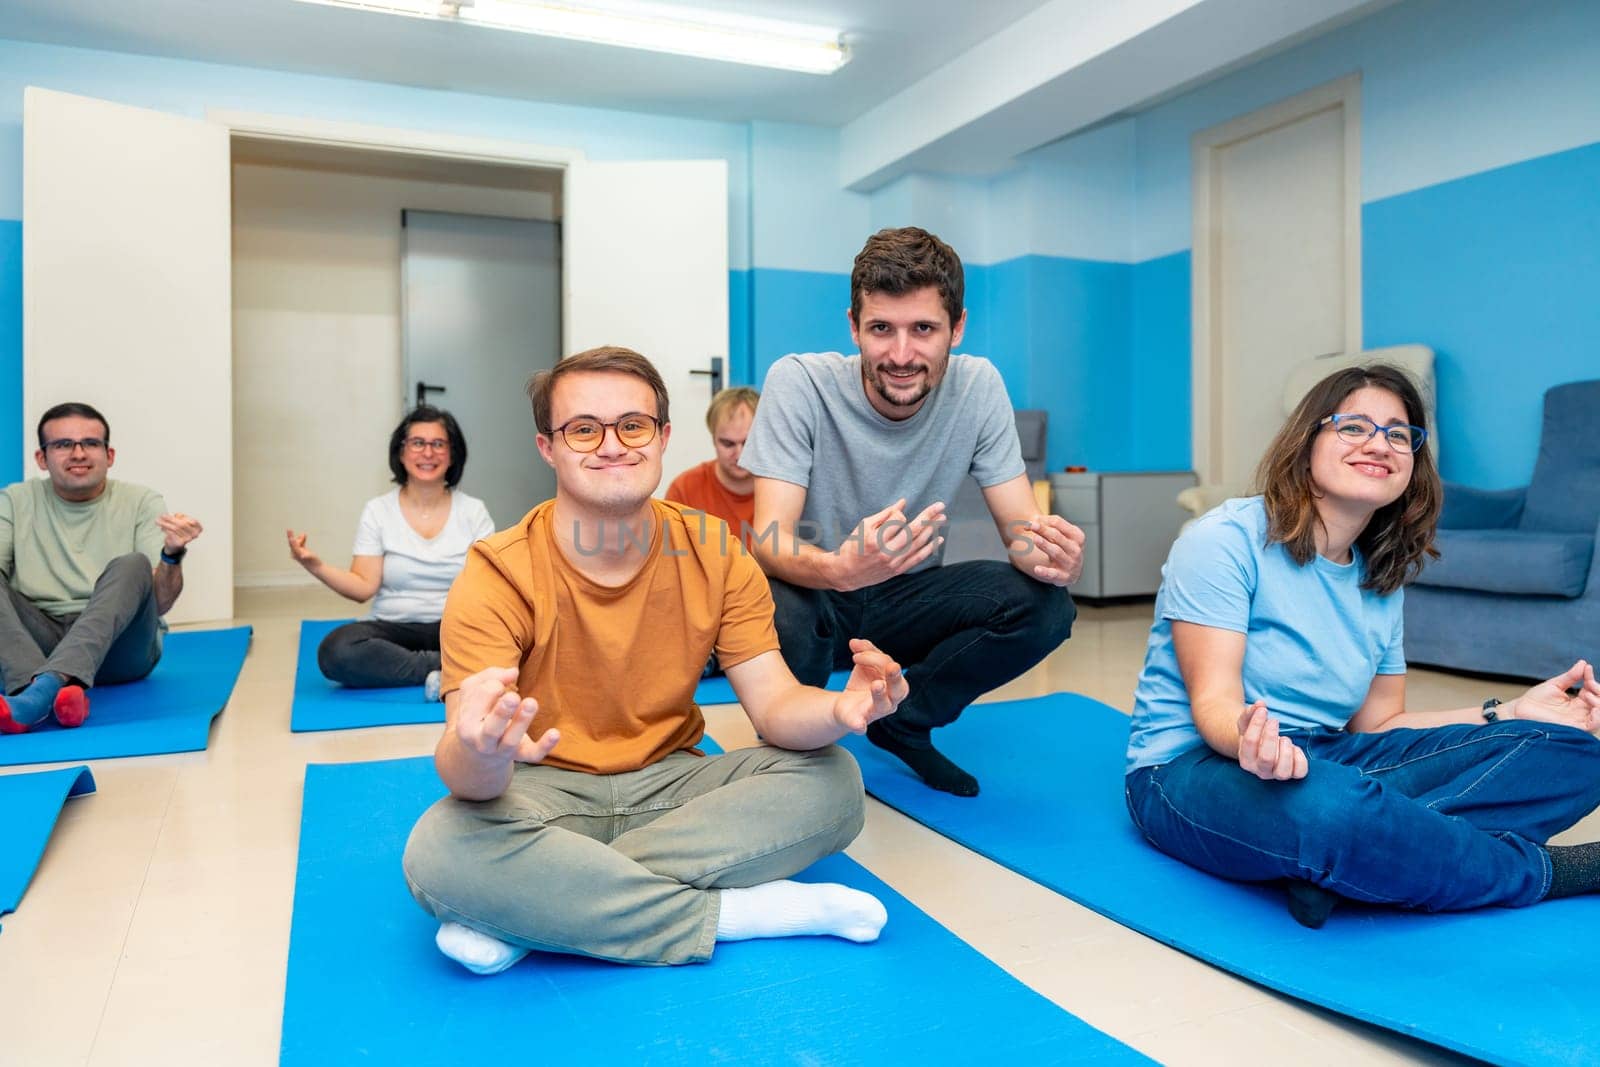 Yoga instructor directing a class with people with special needs by Huizi